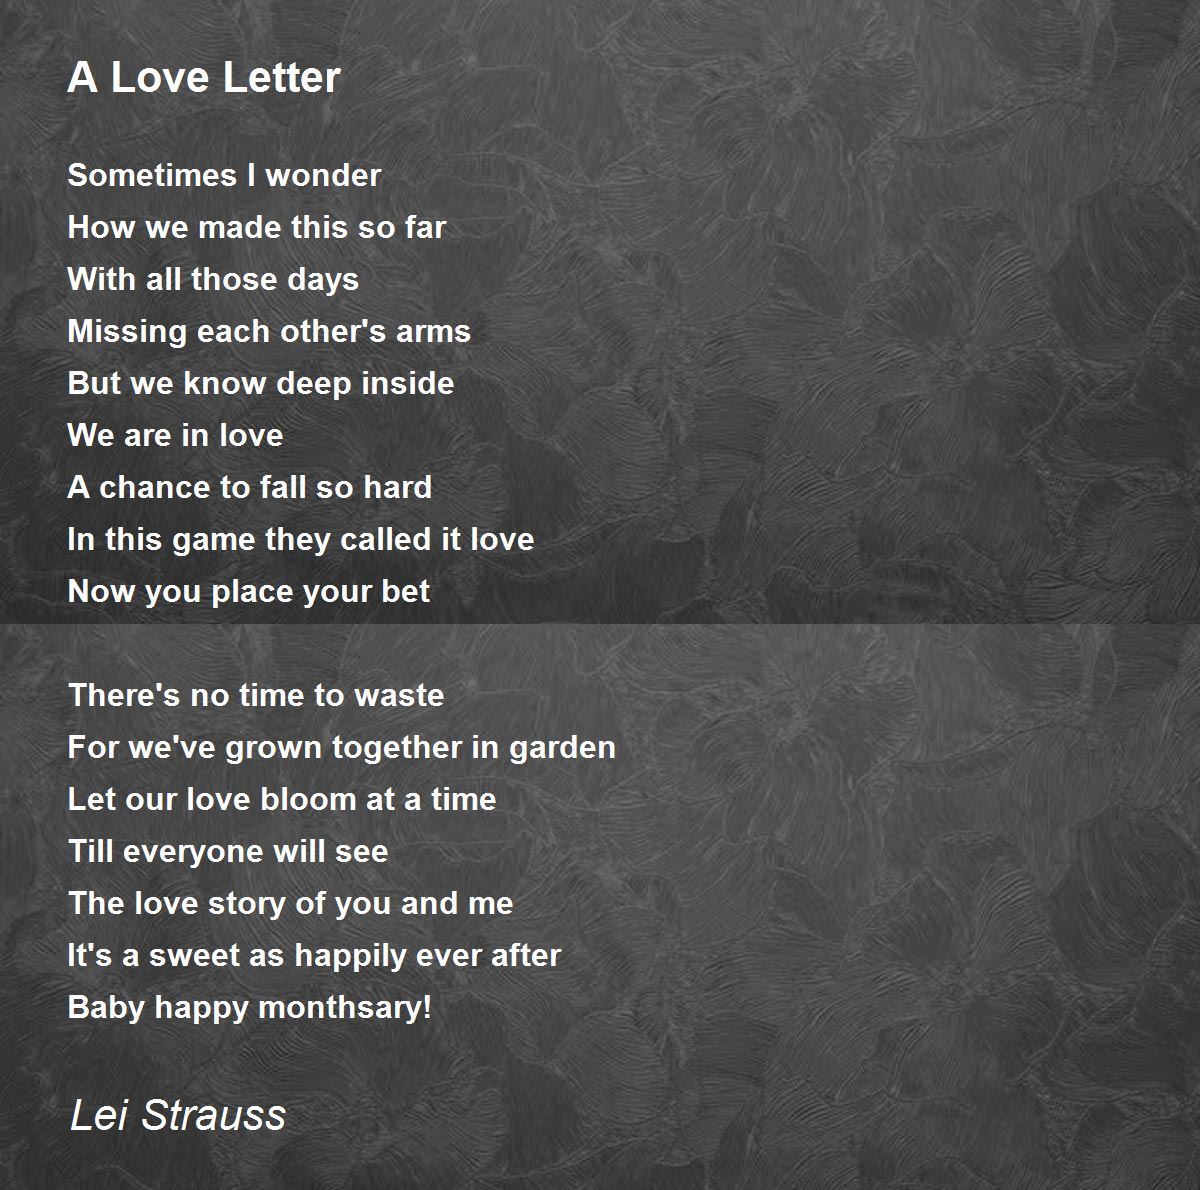 A Love Letter - A Love Letter Poem by Lei Strauss